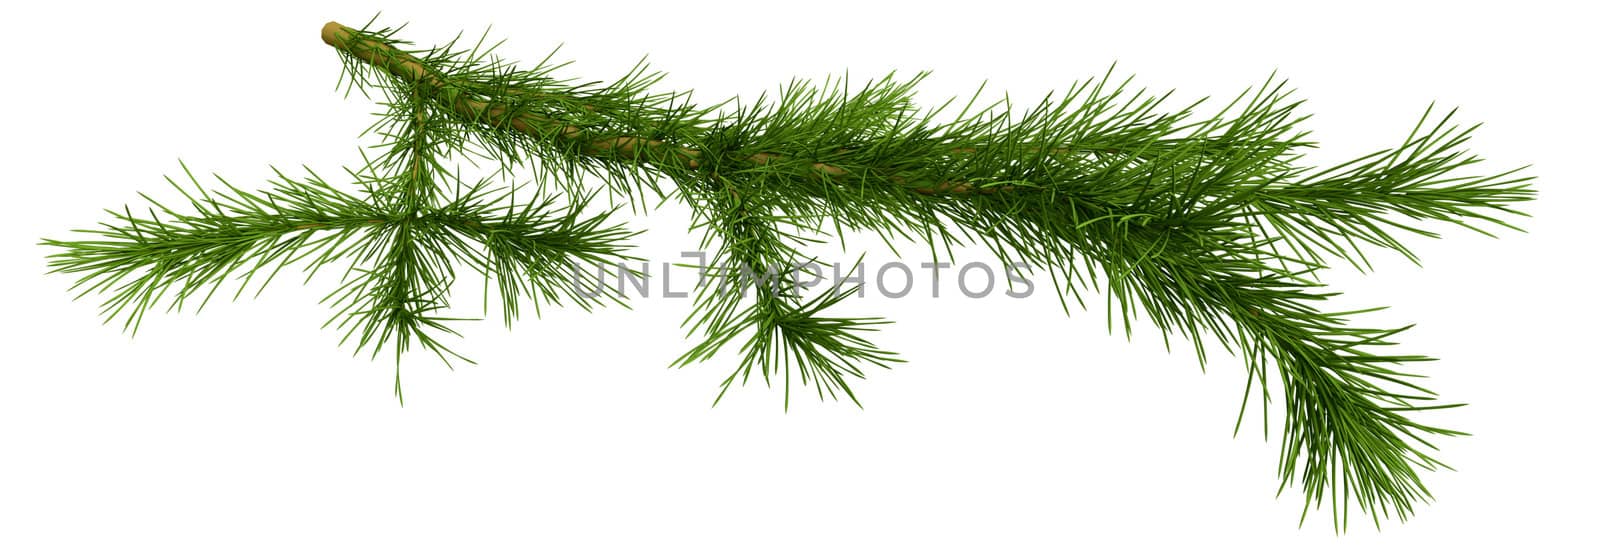 Christmas tree fir branch over white by merzavka